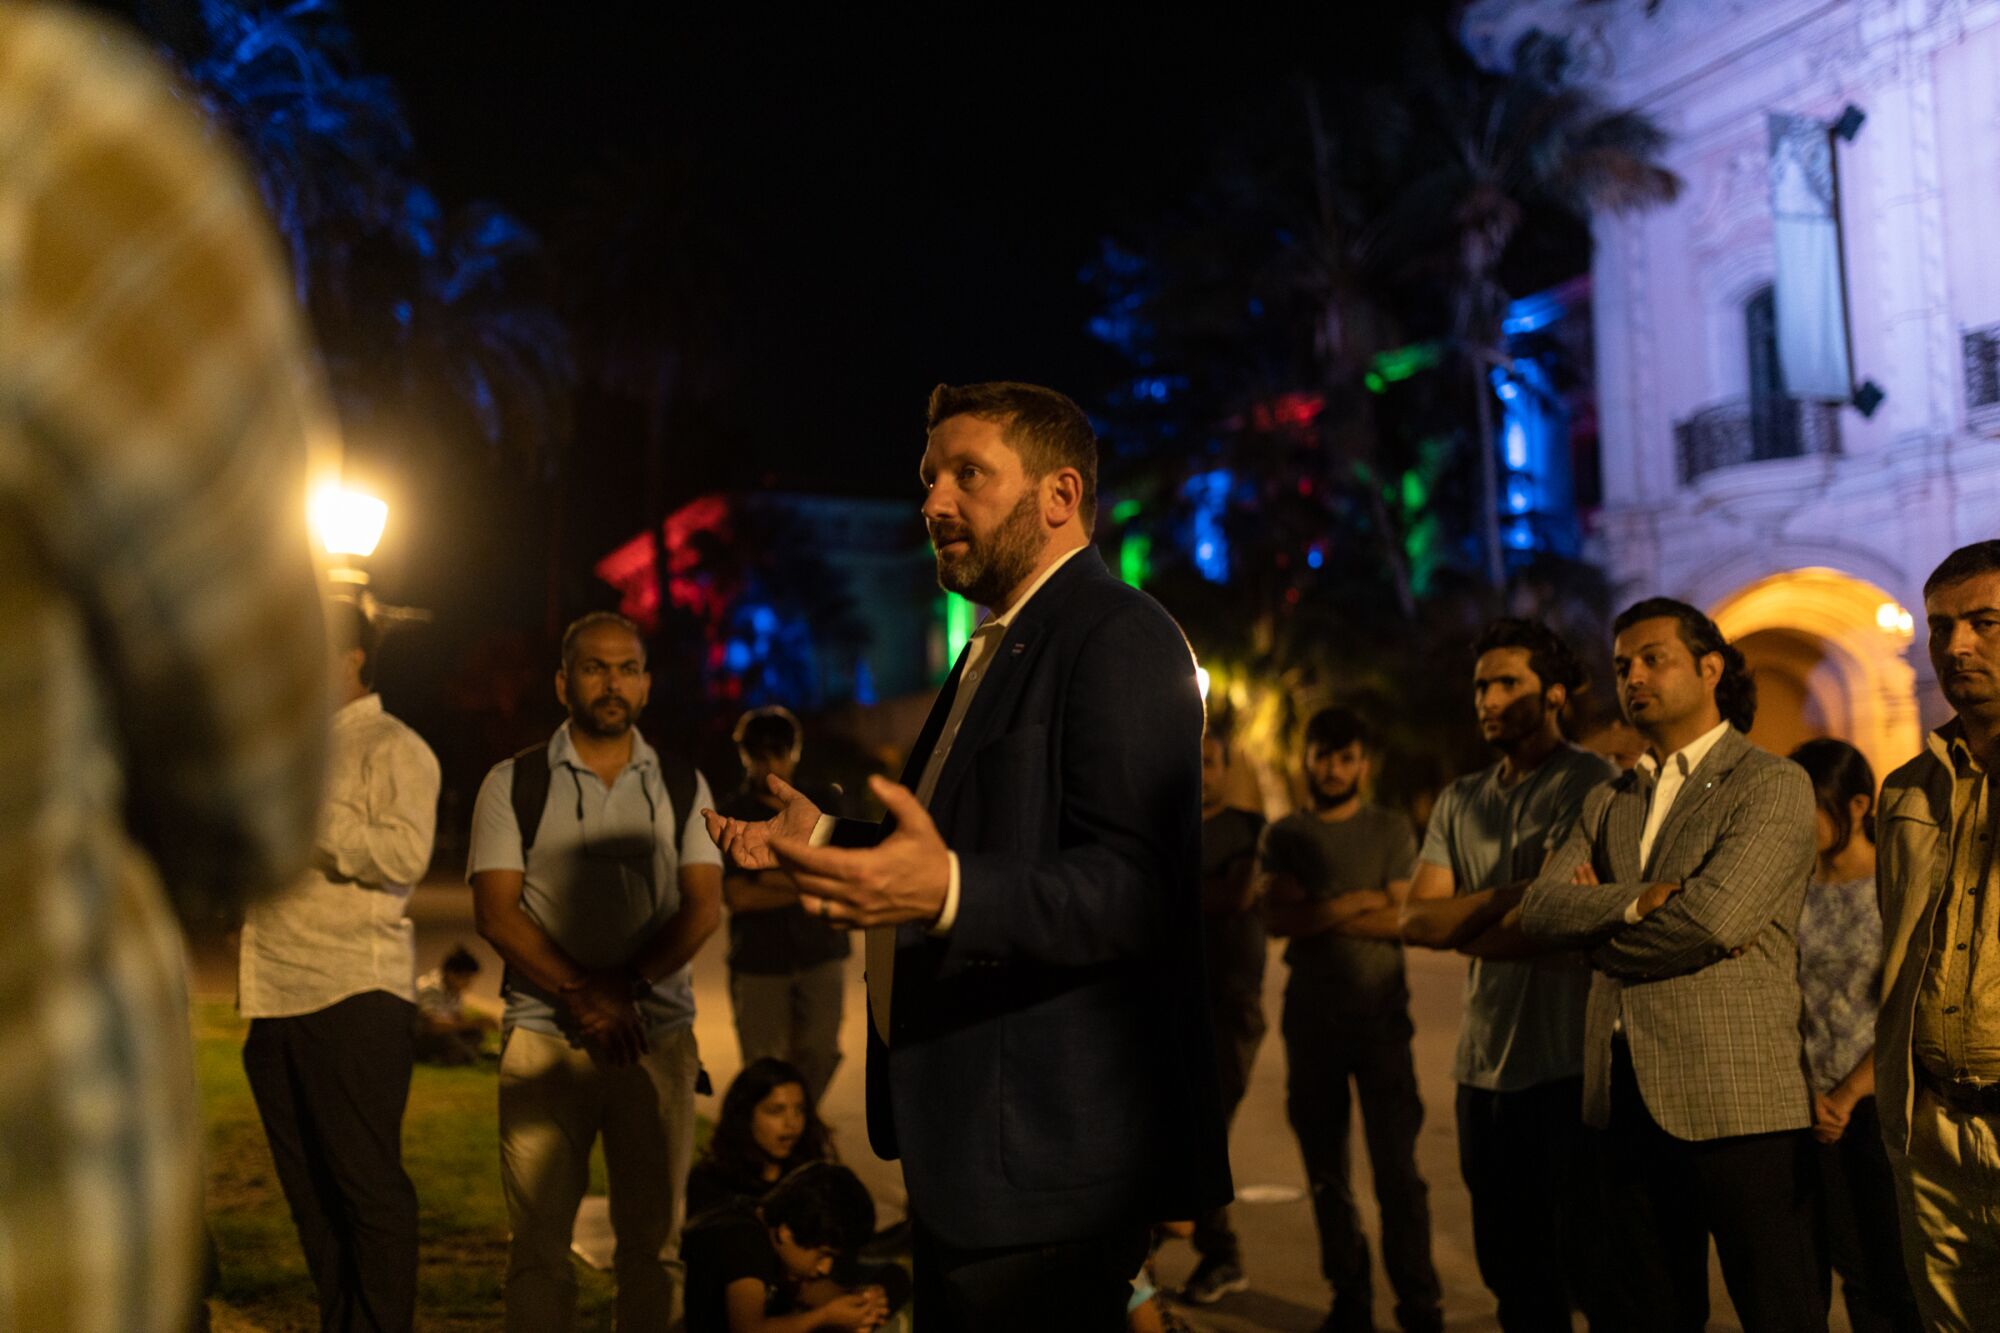 Shawn VanDiver of #AfghanEvac speaks with Afghans in a gathering at Balboa Park